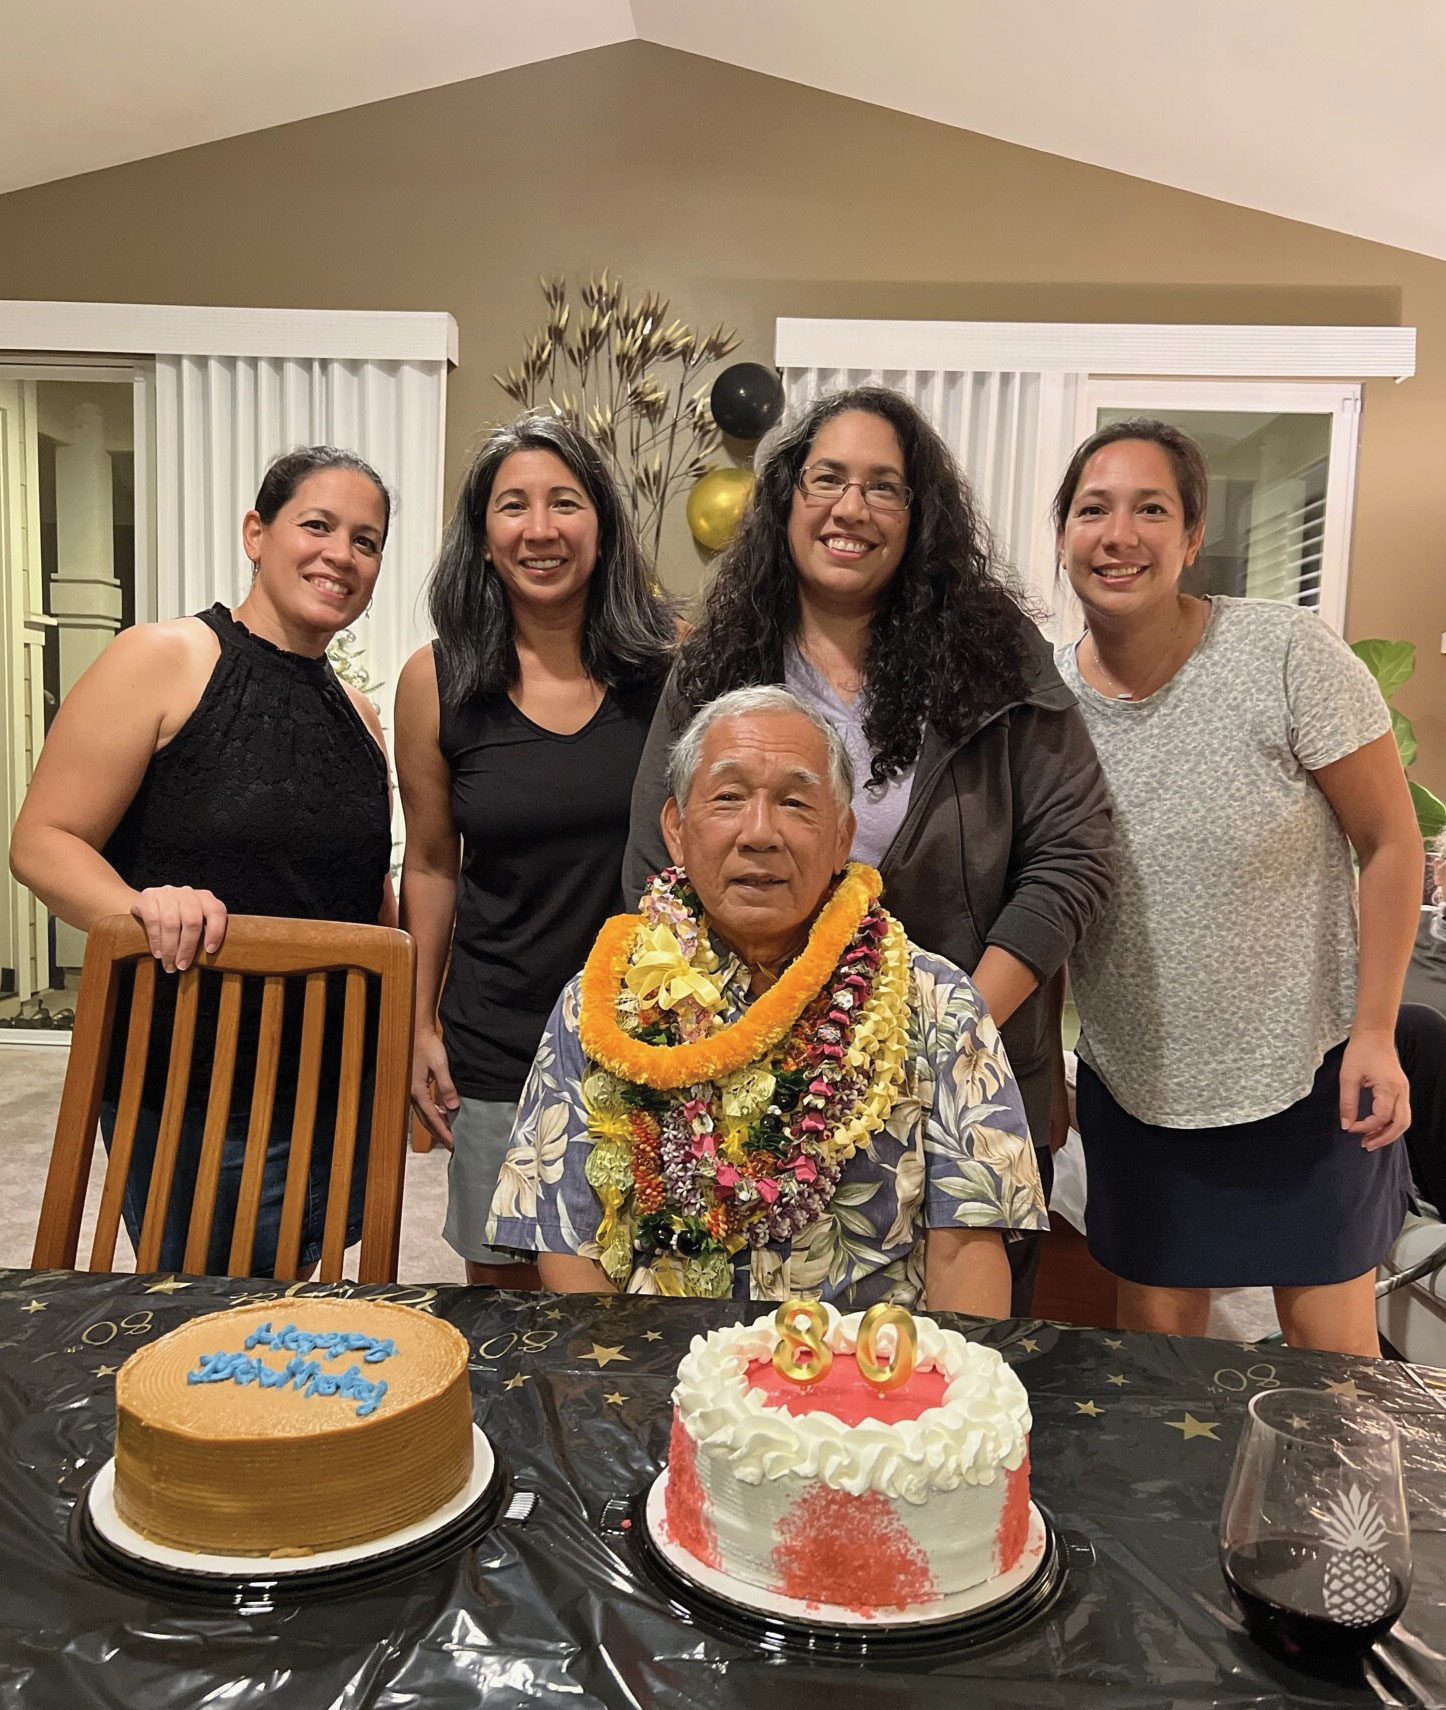 Shimoda and 3 other women smile and stand behind an older man wearing many leis who is seated in front of two birthday cakes